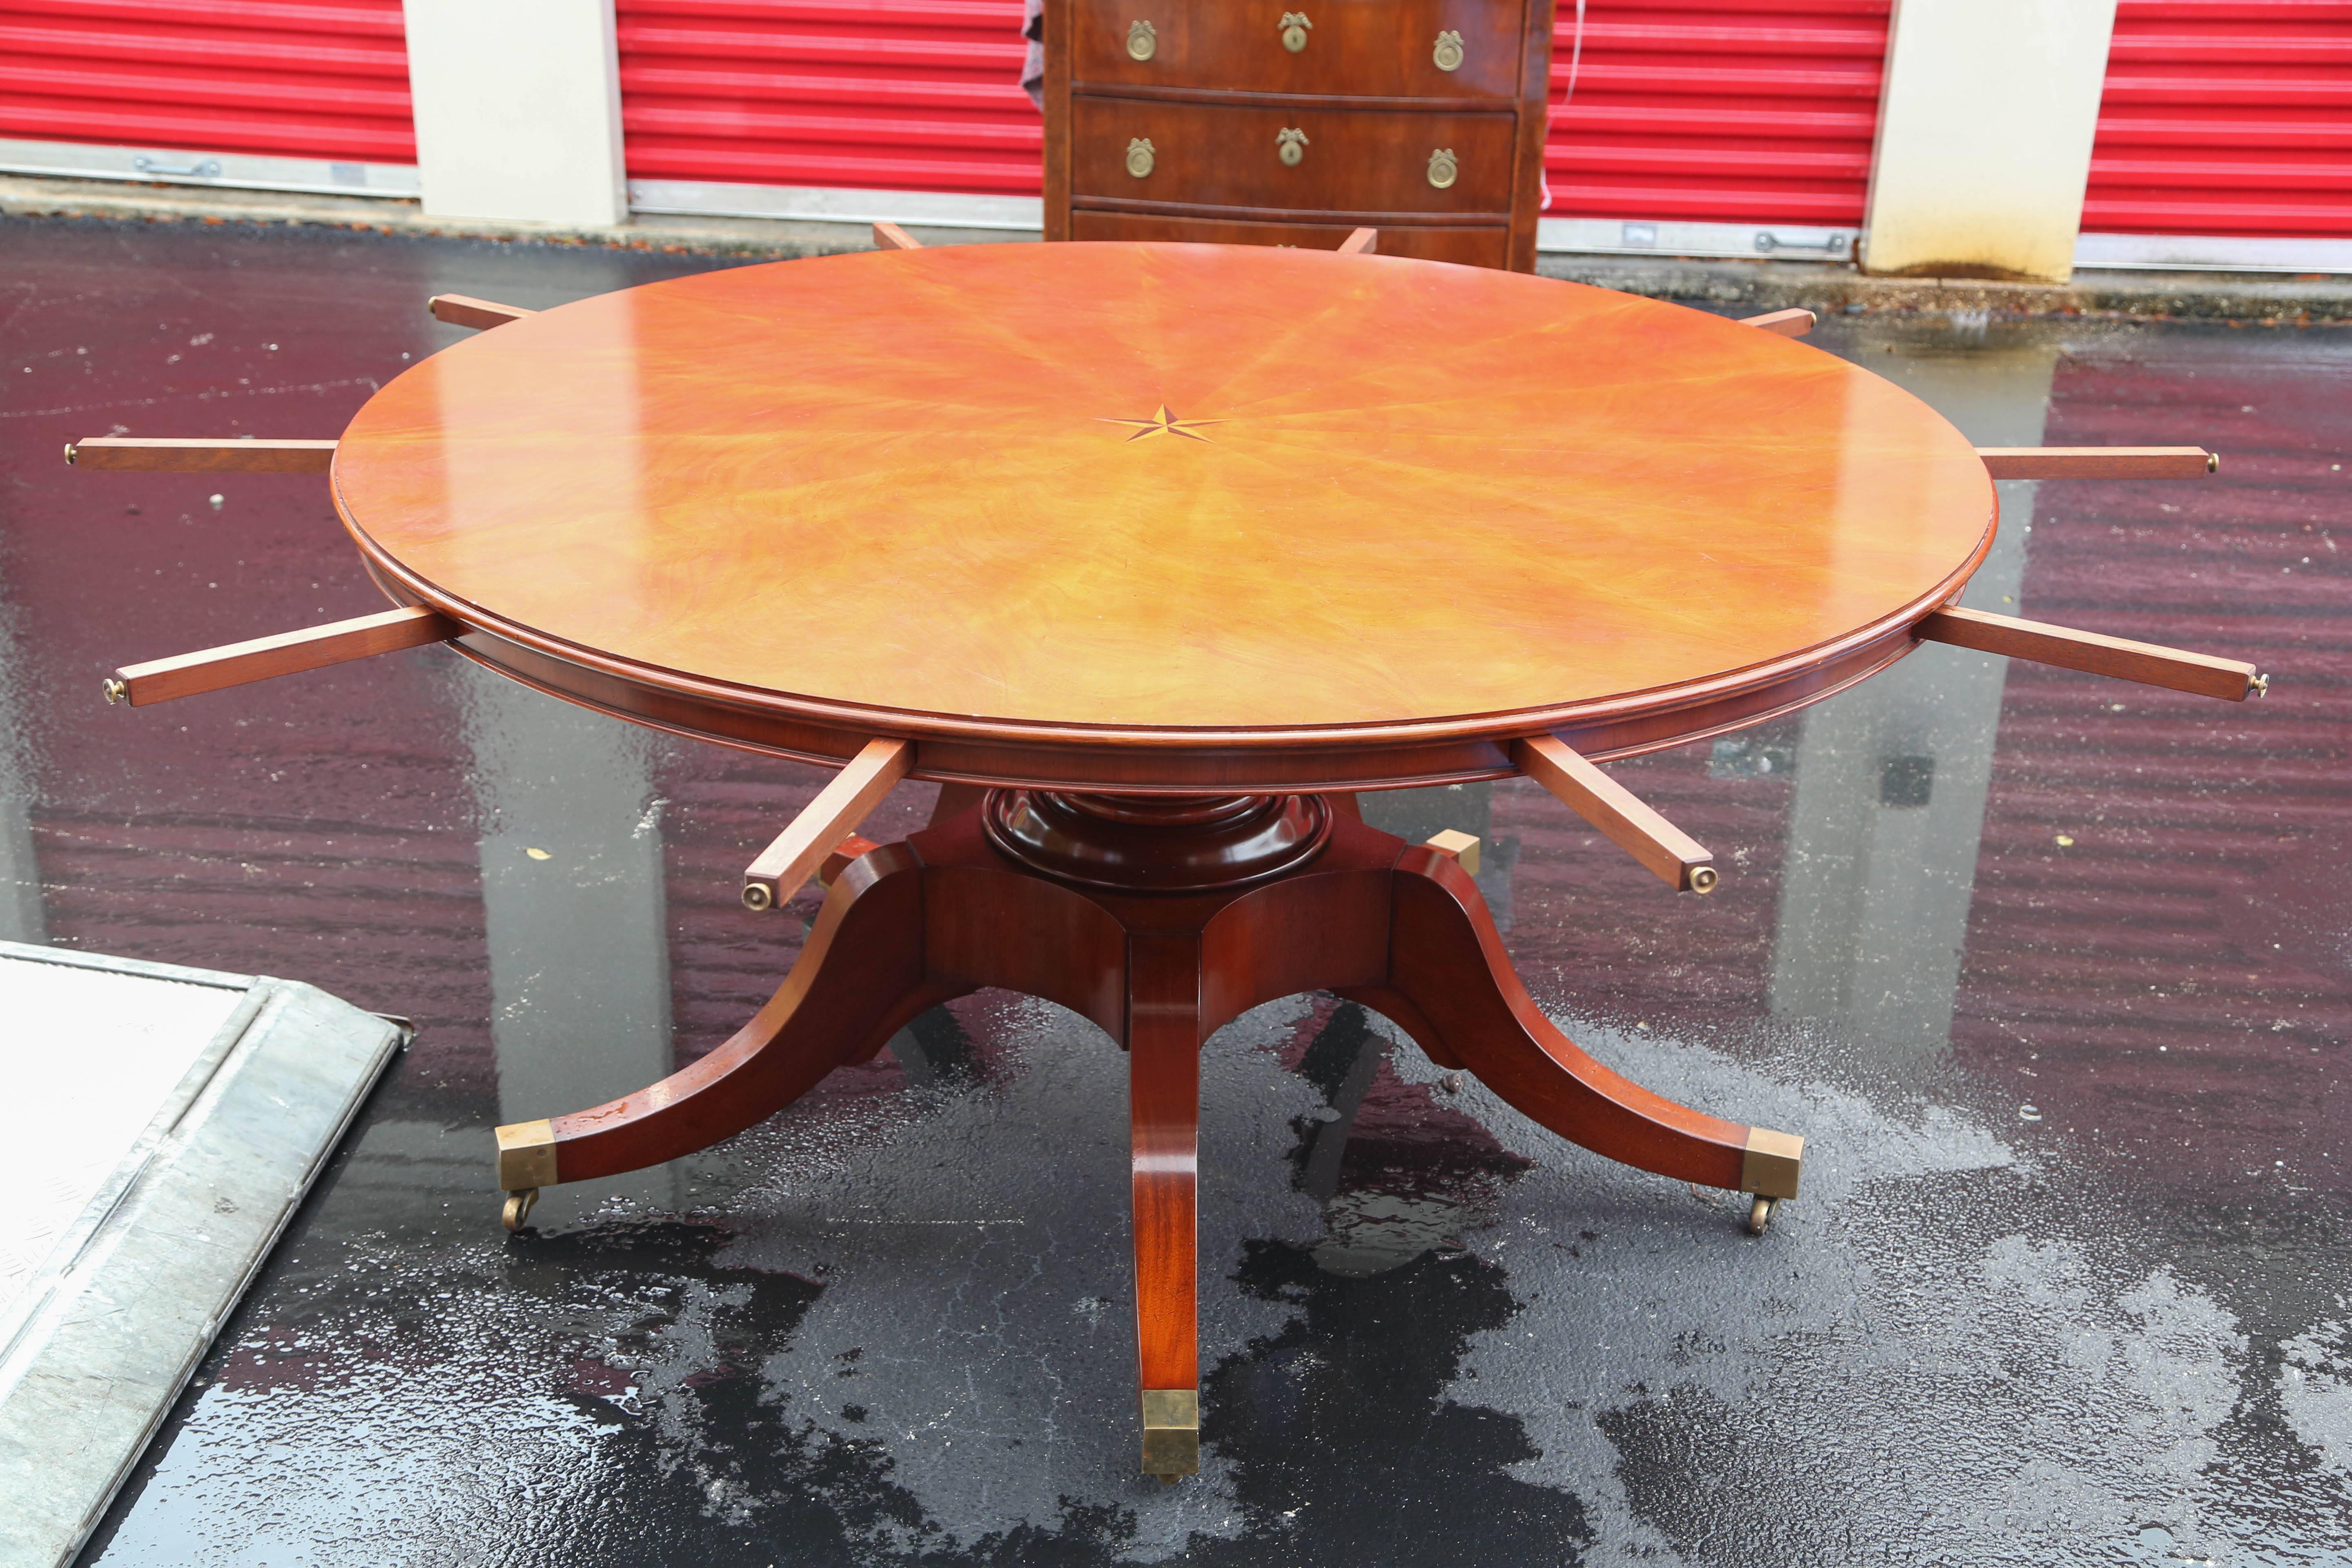 This really is an amazing quality round dining table with leafs to the outside, in excellent condition.
Fully extended its 84 inches round and 30 inches high, each leaf are 10 inches.
There are five leafs which slot in on the outside.
To the